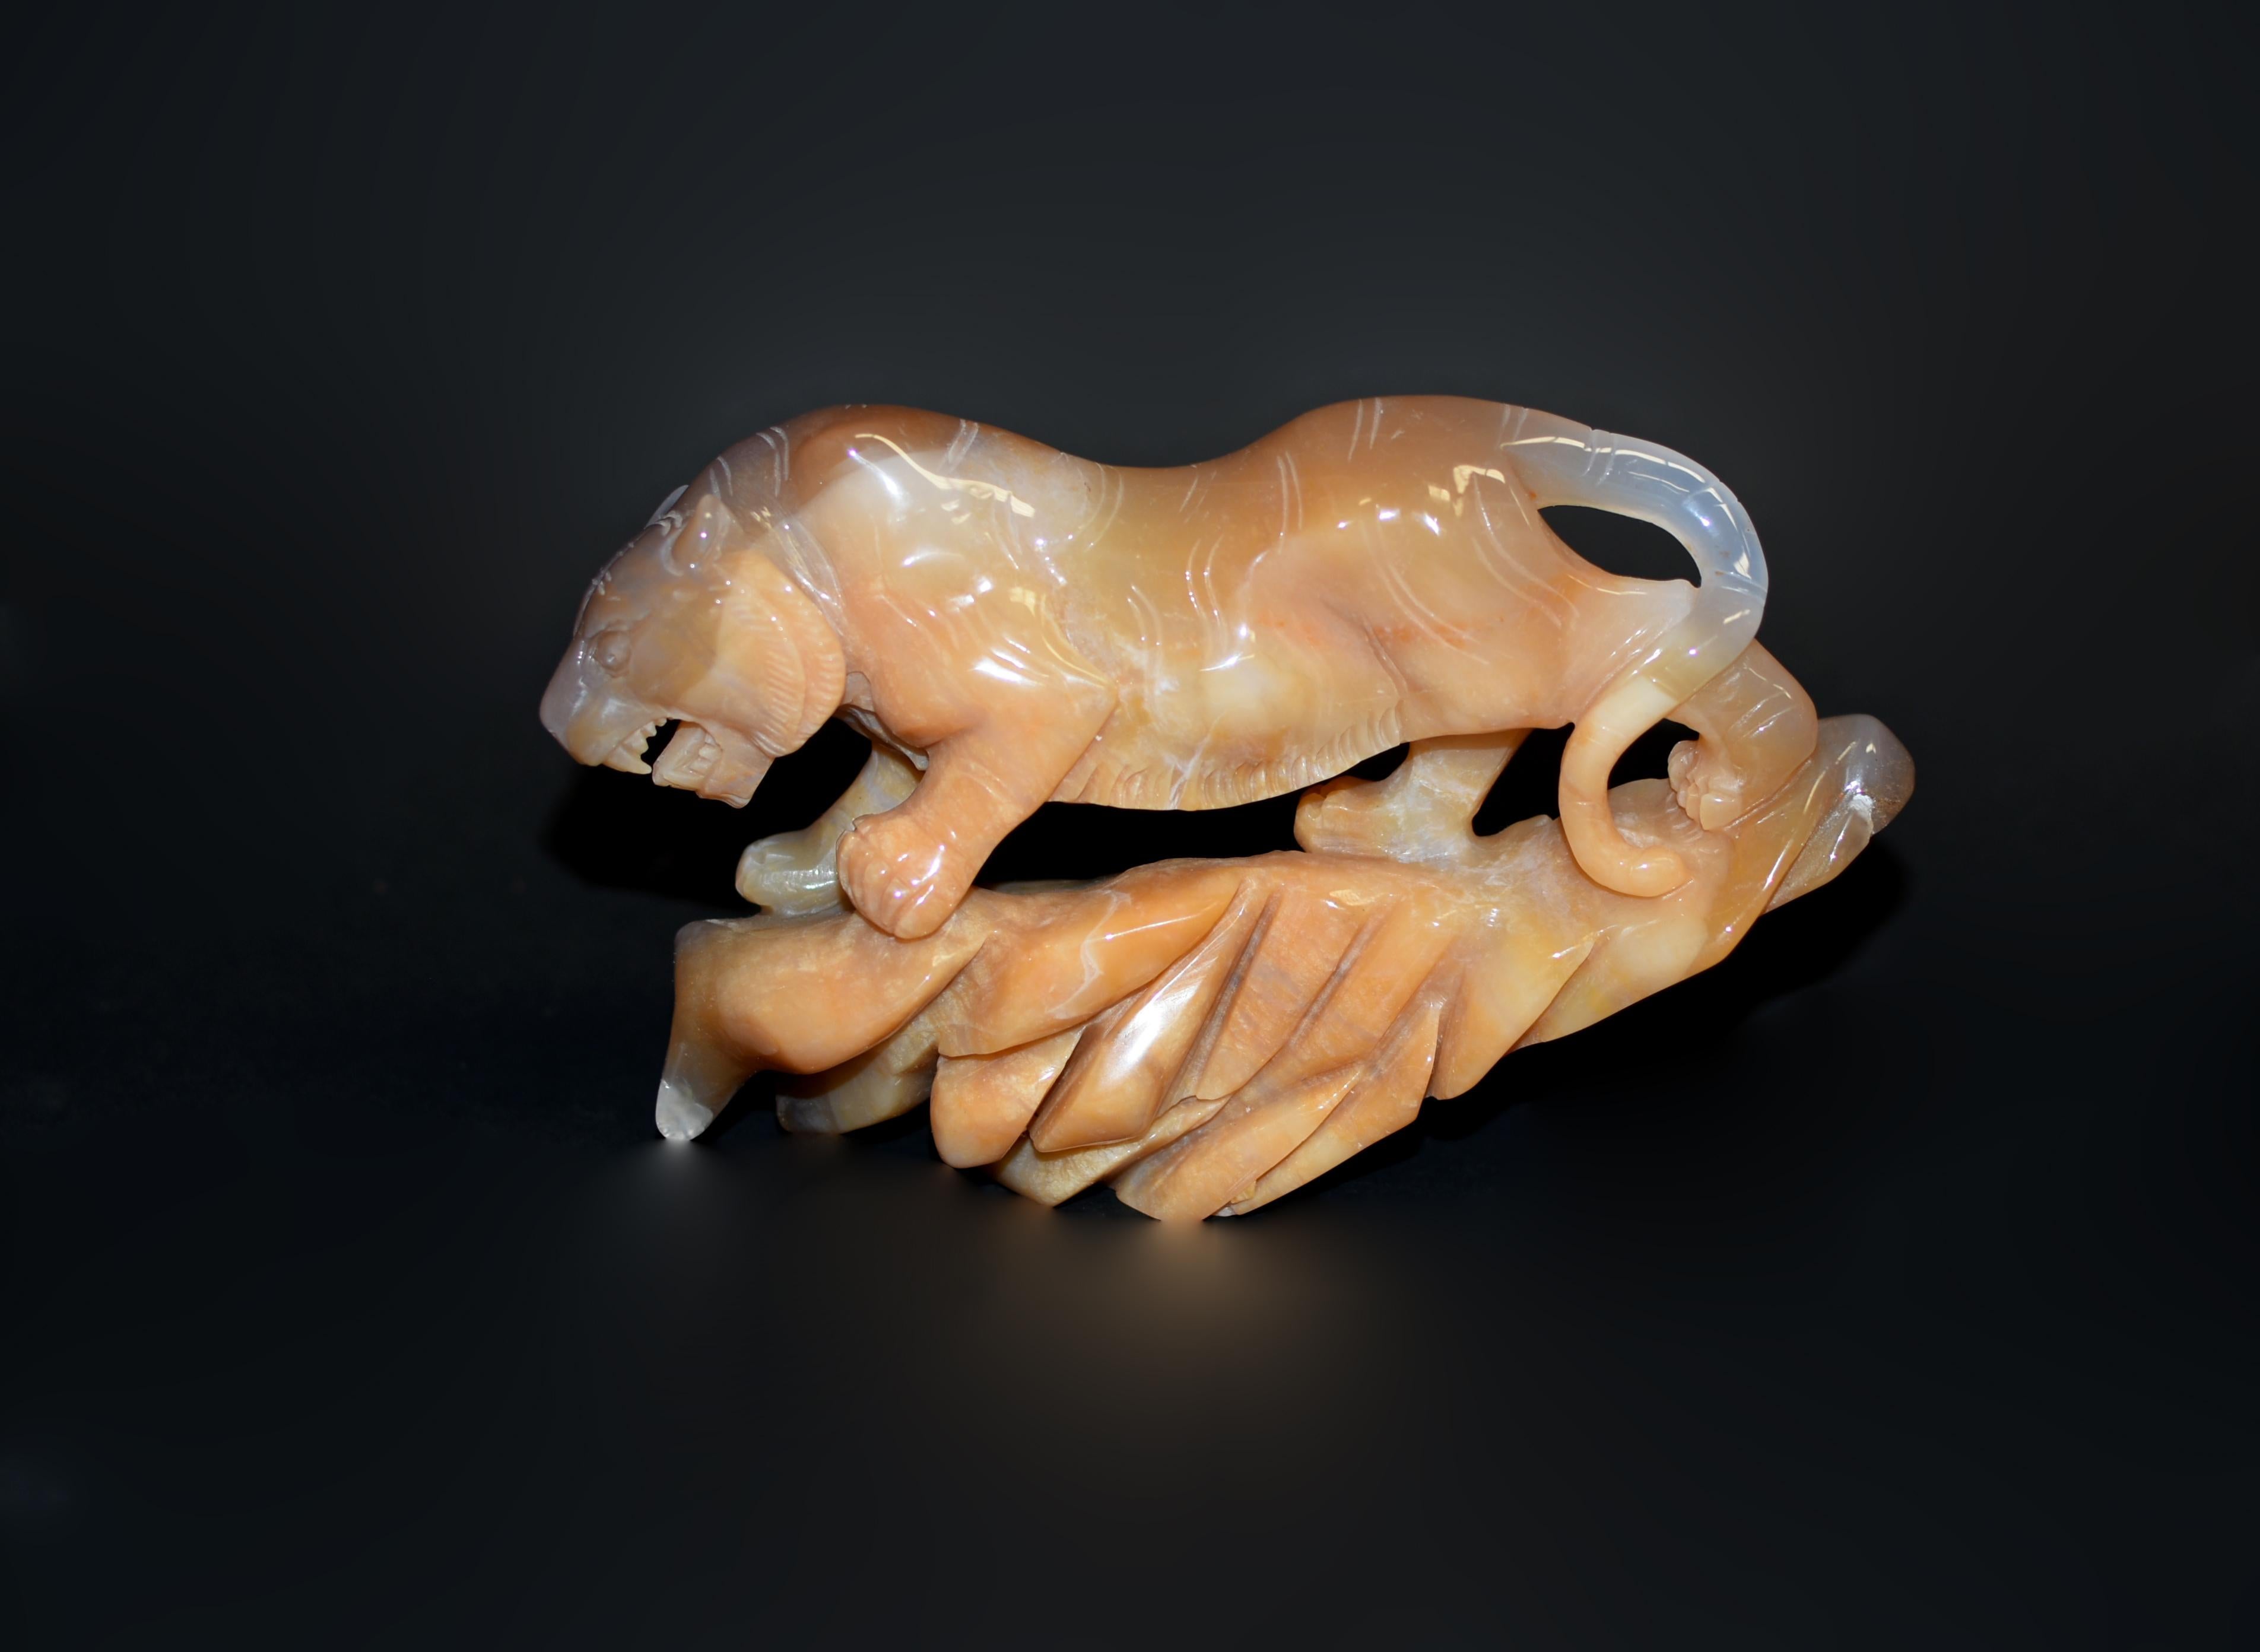 A beautiful hand-carved 2.5 lb honey agate tiger statue. Poised on a rock with all four paws firmly planted, the tiger exhibits a commanding presence with a large head projecting a ferocious roar. The strong paws, muscular body, and long robust tail